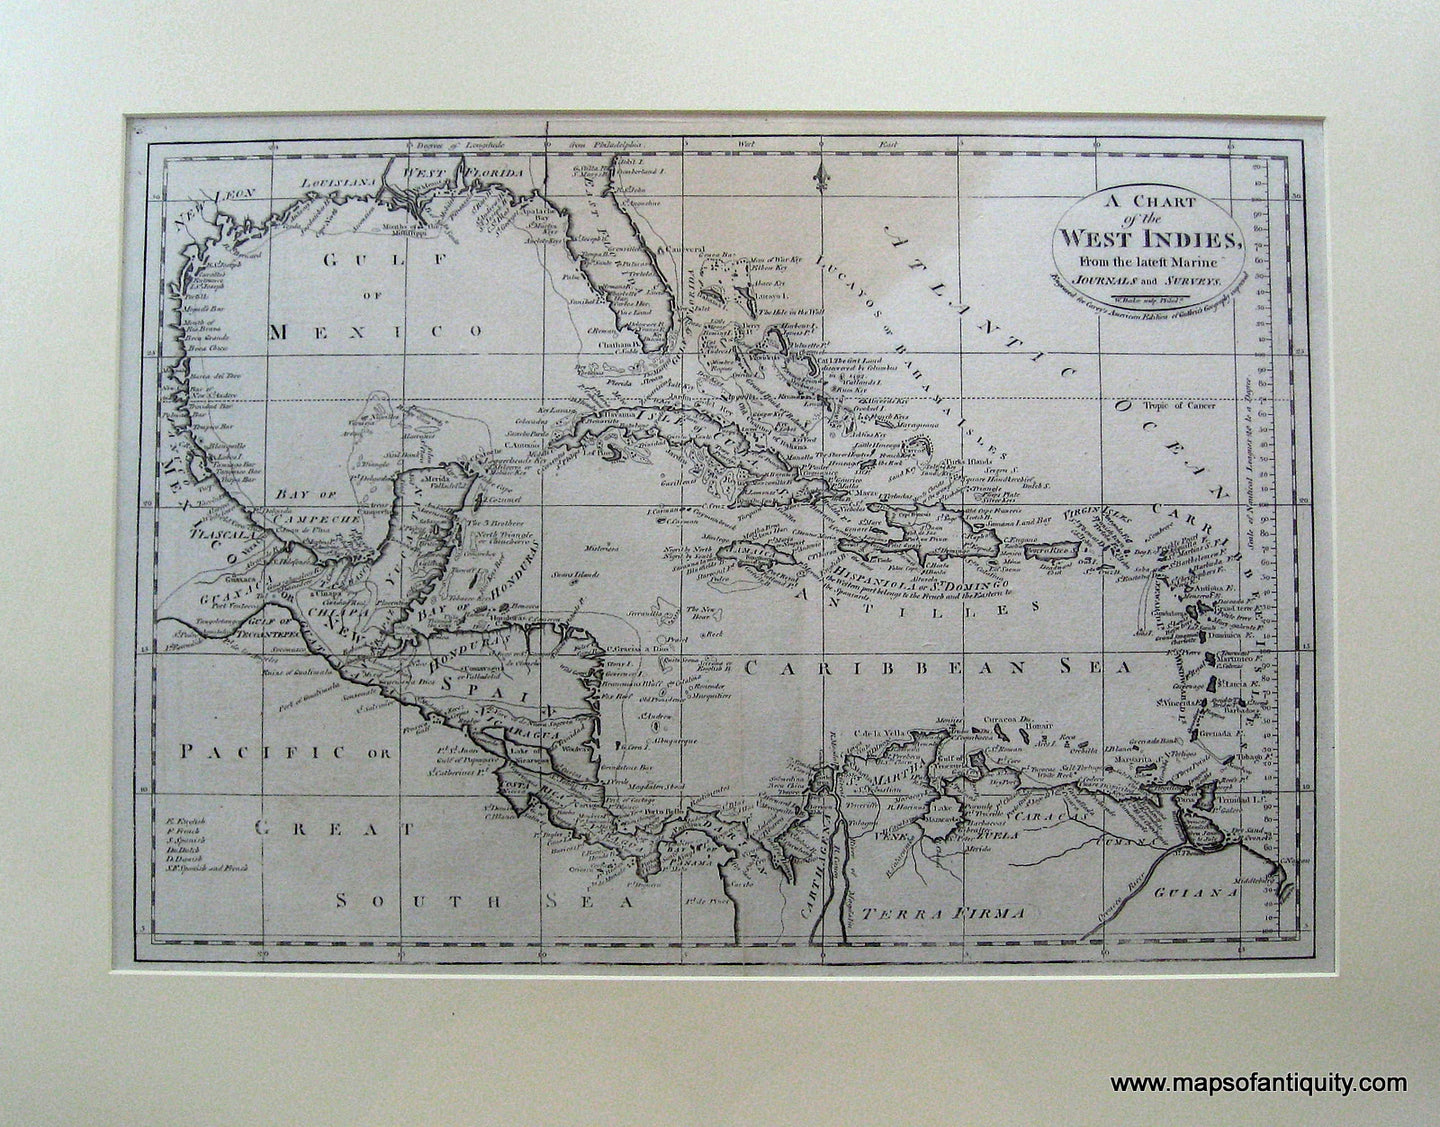 Black-and-White-Antique-Map-A-Chart-of-the-West-Indies.-From-the-Latest-Marine-Journals-and-Surveys.-**********-Central-America-and-Caribbean-West-Indies-1796-Mathew-Carey-Maps-Of-Antiquity